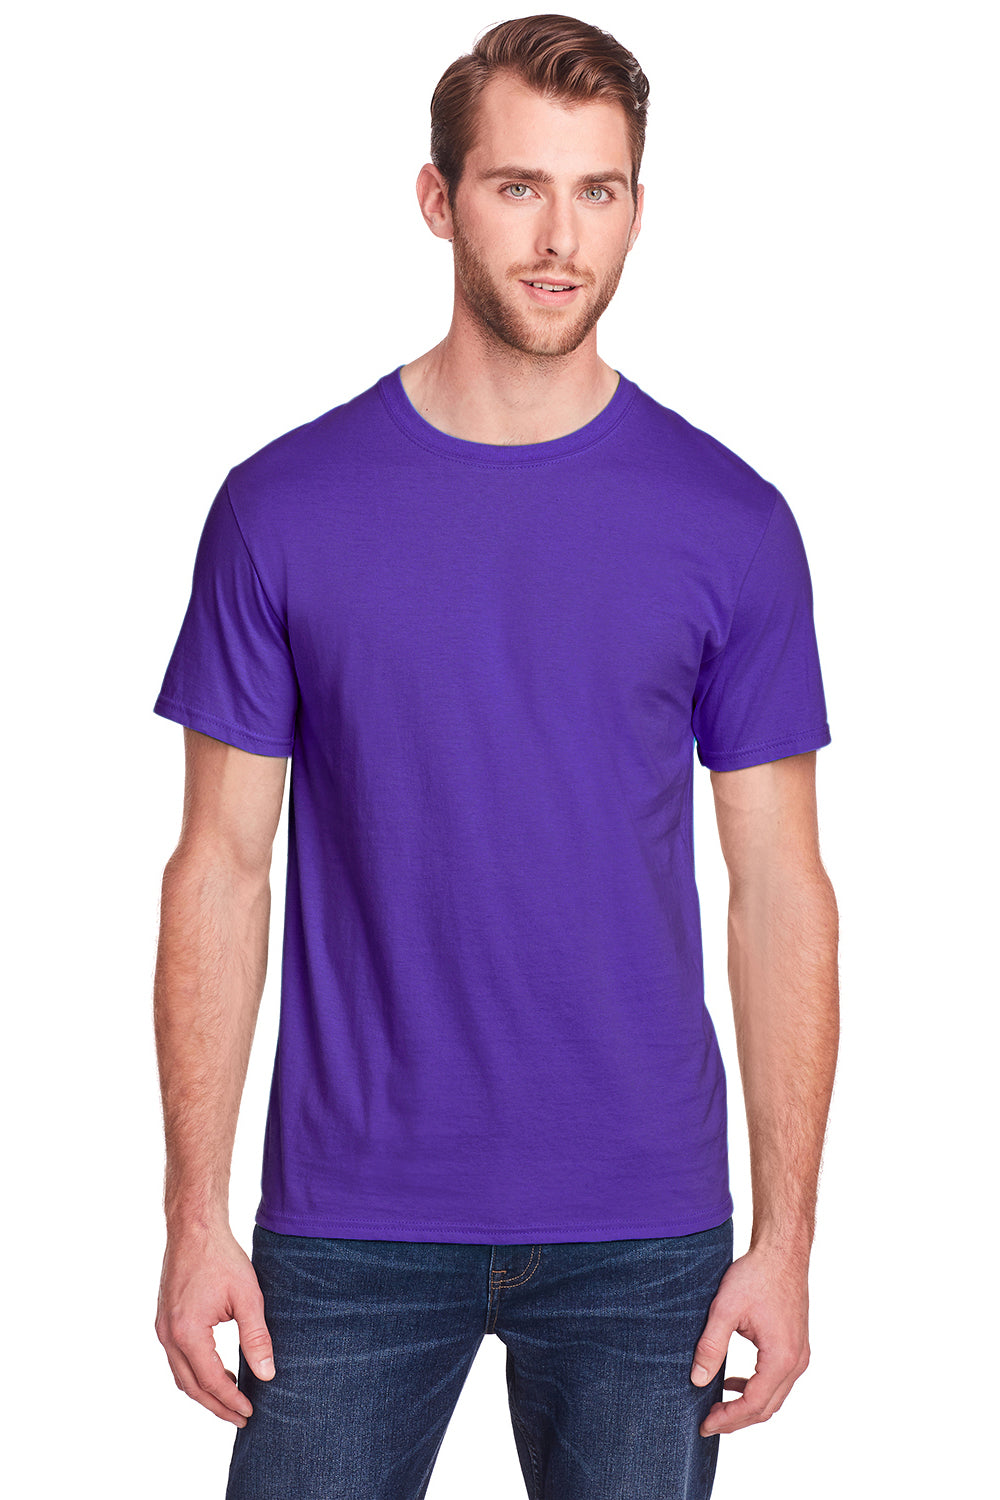 Fruit Of The Loom IC47MR Mens Iconic Short Sleeve Crewneck T-Shirt Purple Front